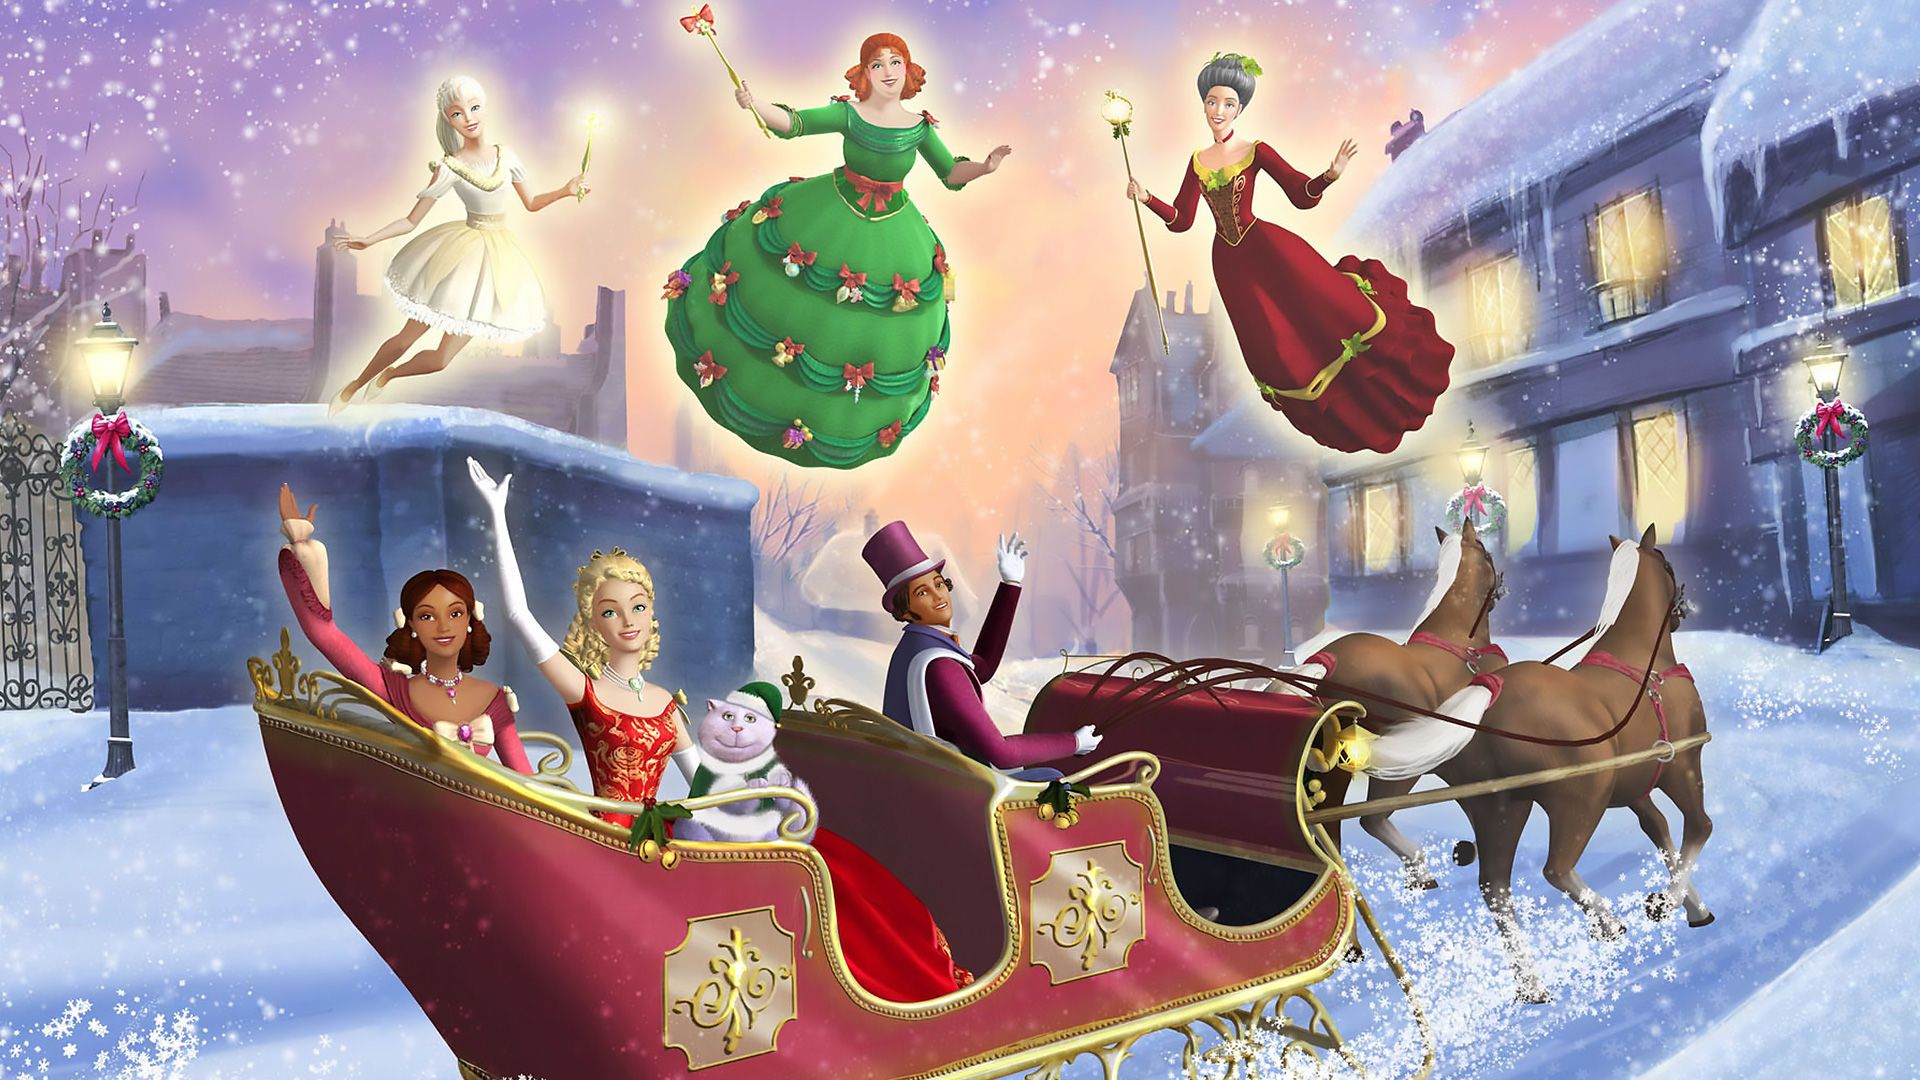 Barbie in 'A Christmas Carol' background